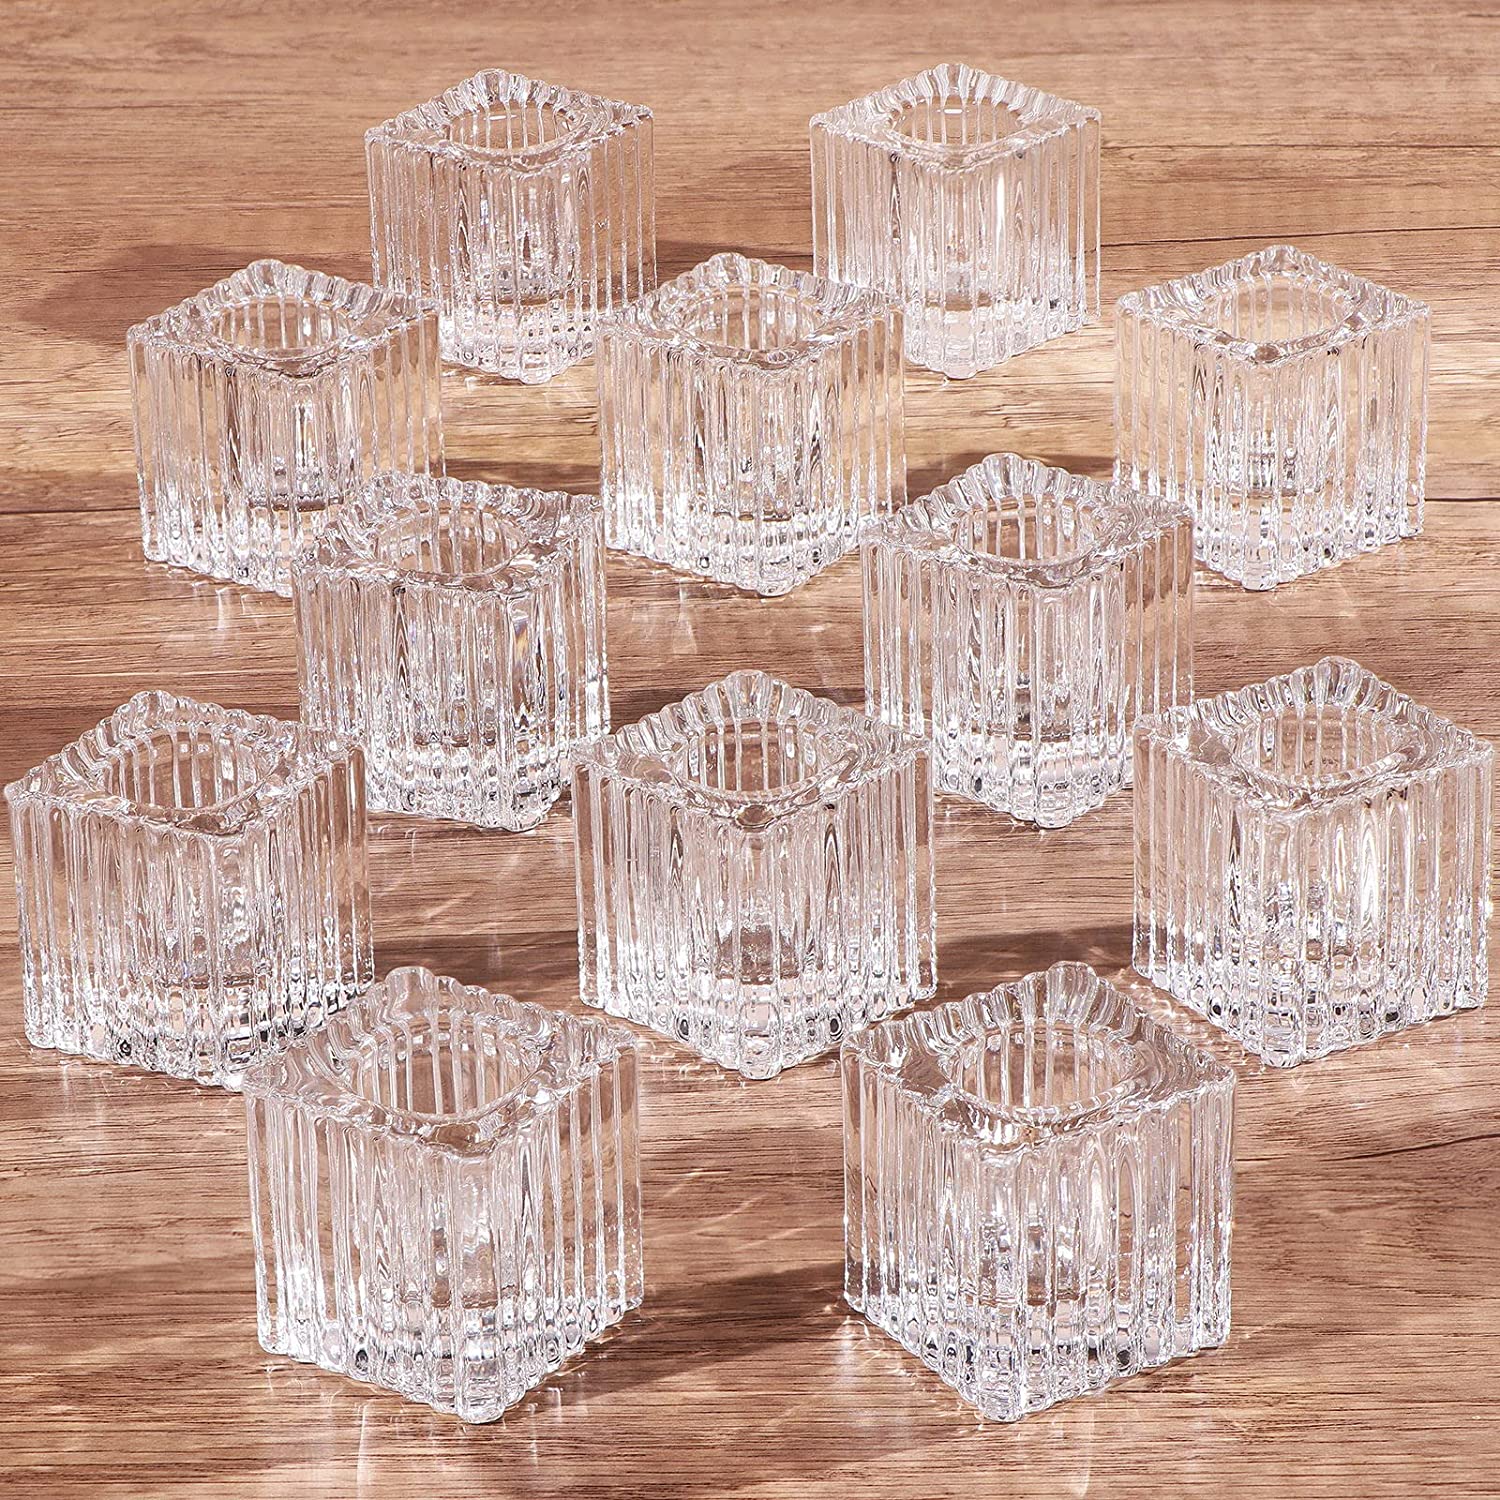 Taper Candle Holders Small Glass Candlestick Holders for Table Centerpiece Wedding Valentines Day